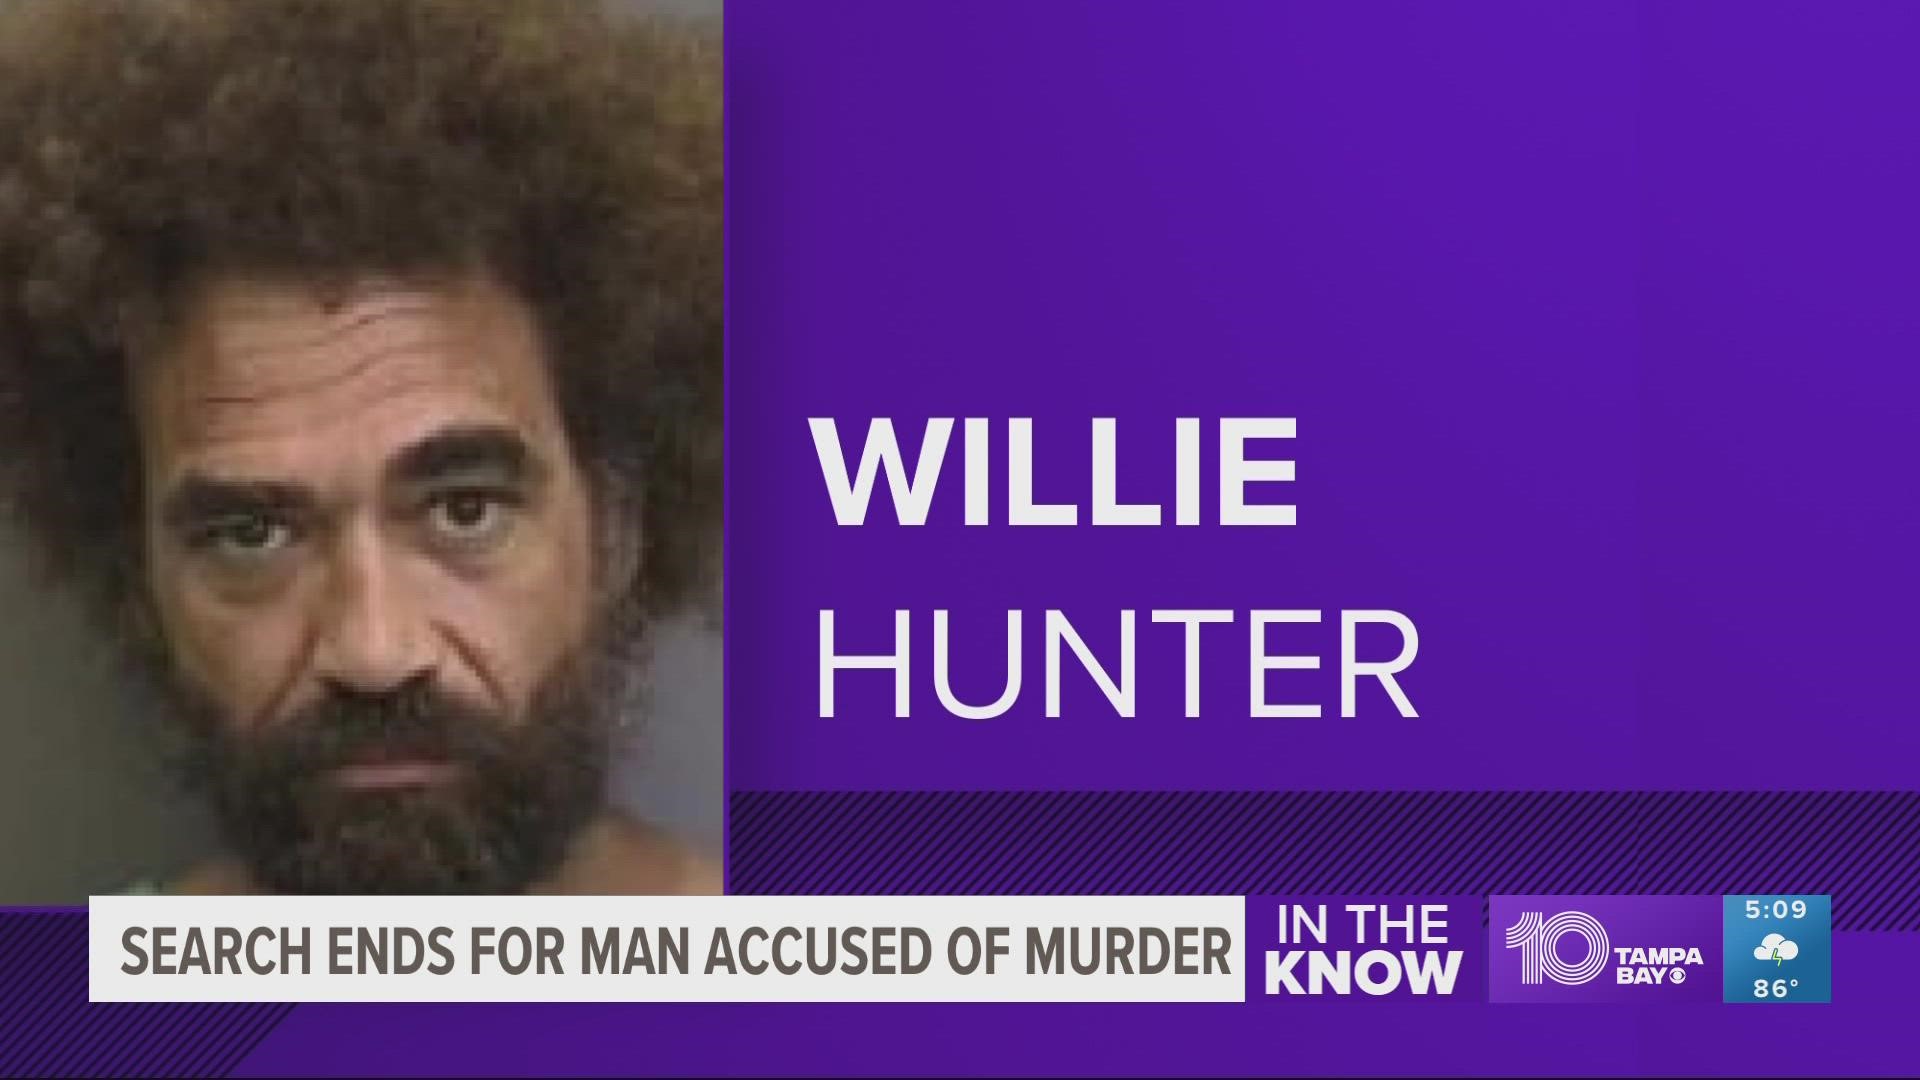 Deputies had previously said Willie Hunter was considered "armed and dangerous."